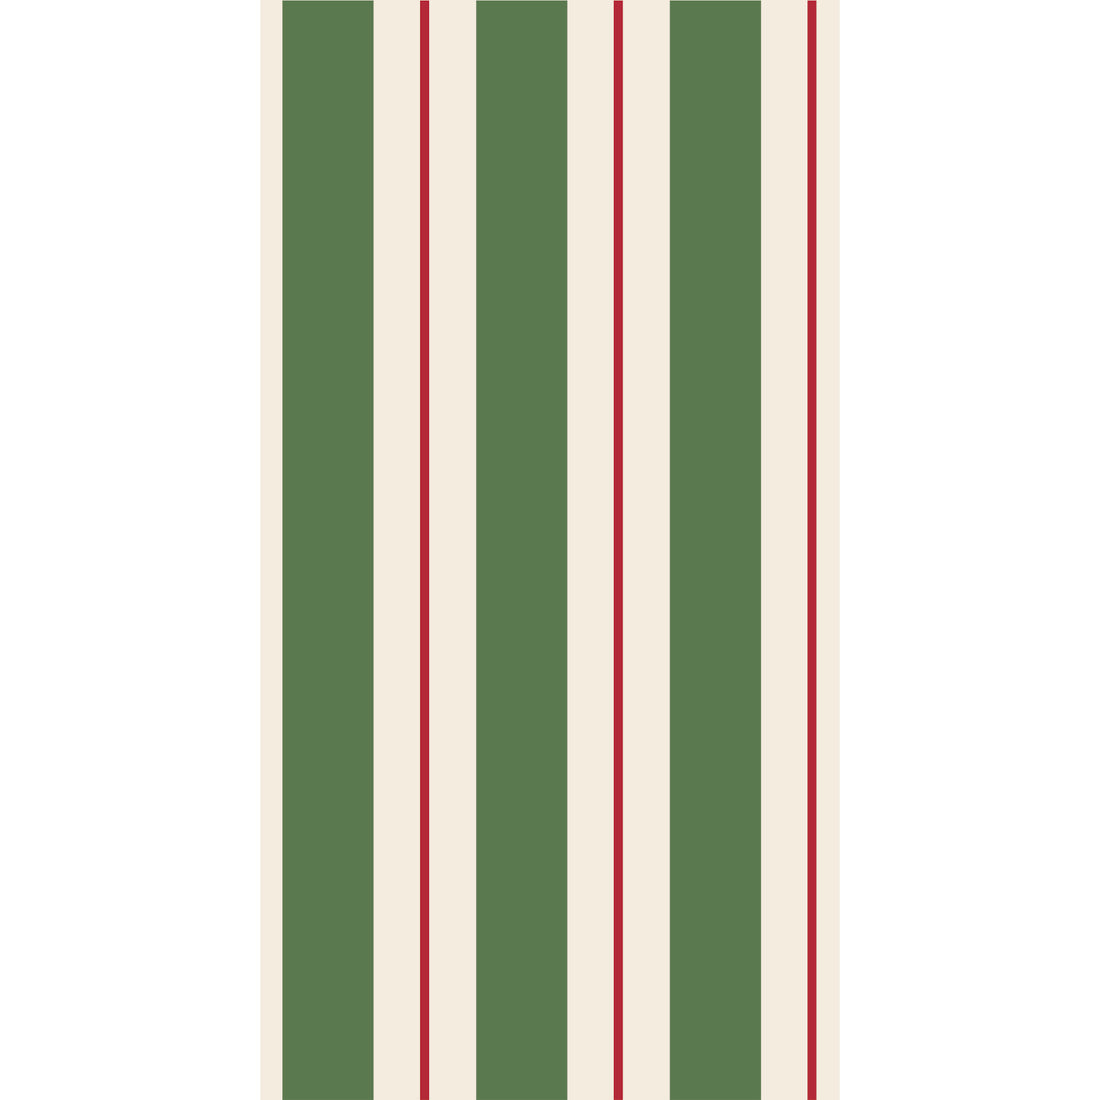 A Green &amp; Red Awning Stripe Napkin with white stripes, perfect for a lively party table setting. (Brand: Hester &amp; Cook)